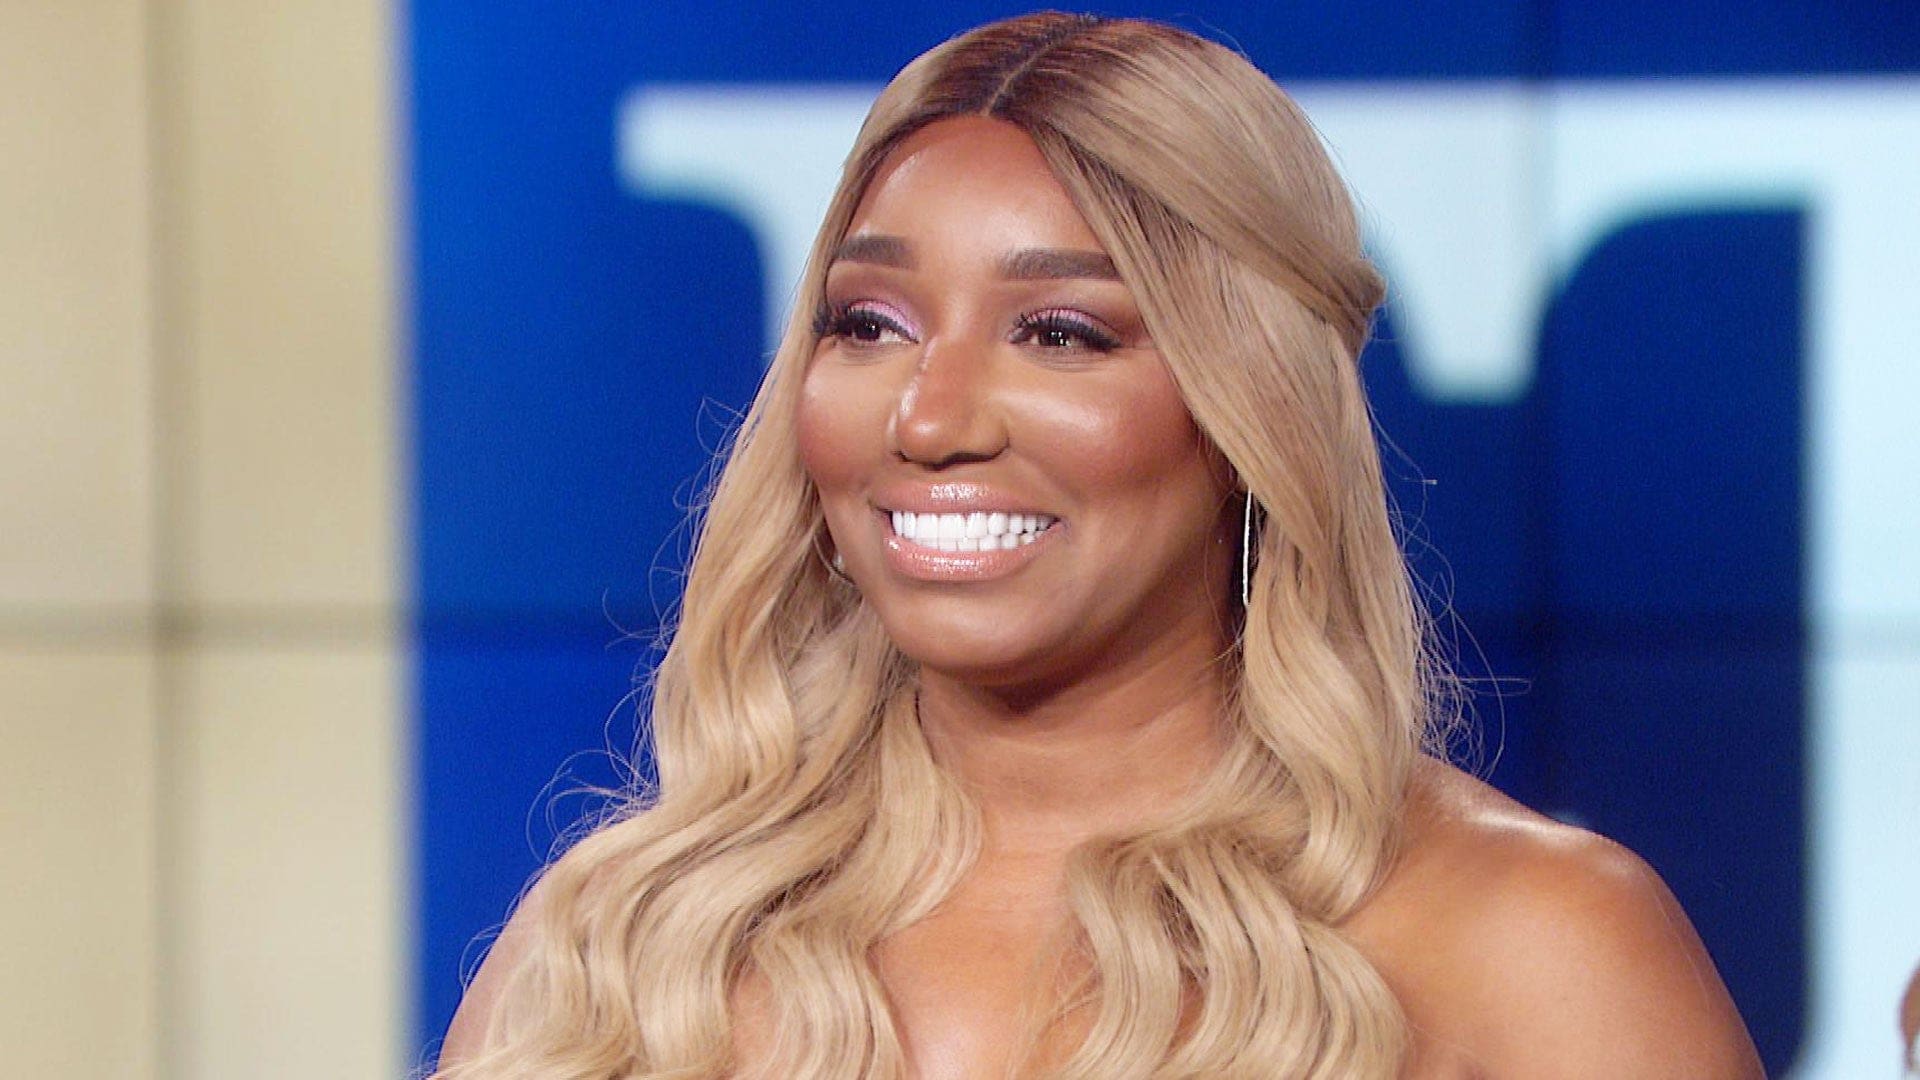 nene-leakes-is-serving-a-teenager-attitude-with-the-latest-photo-she-shared